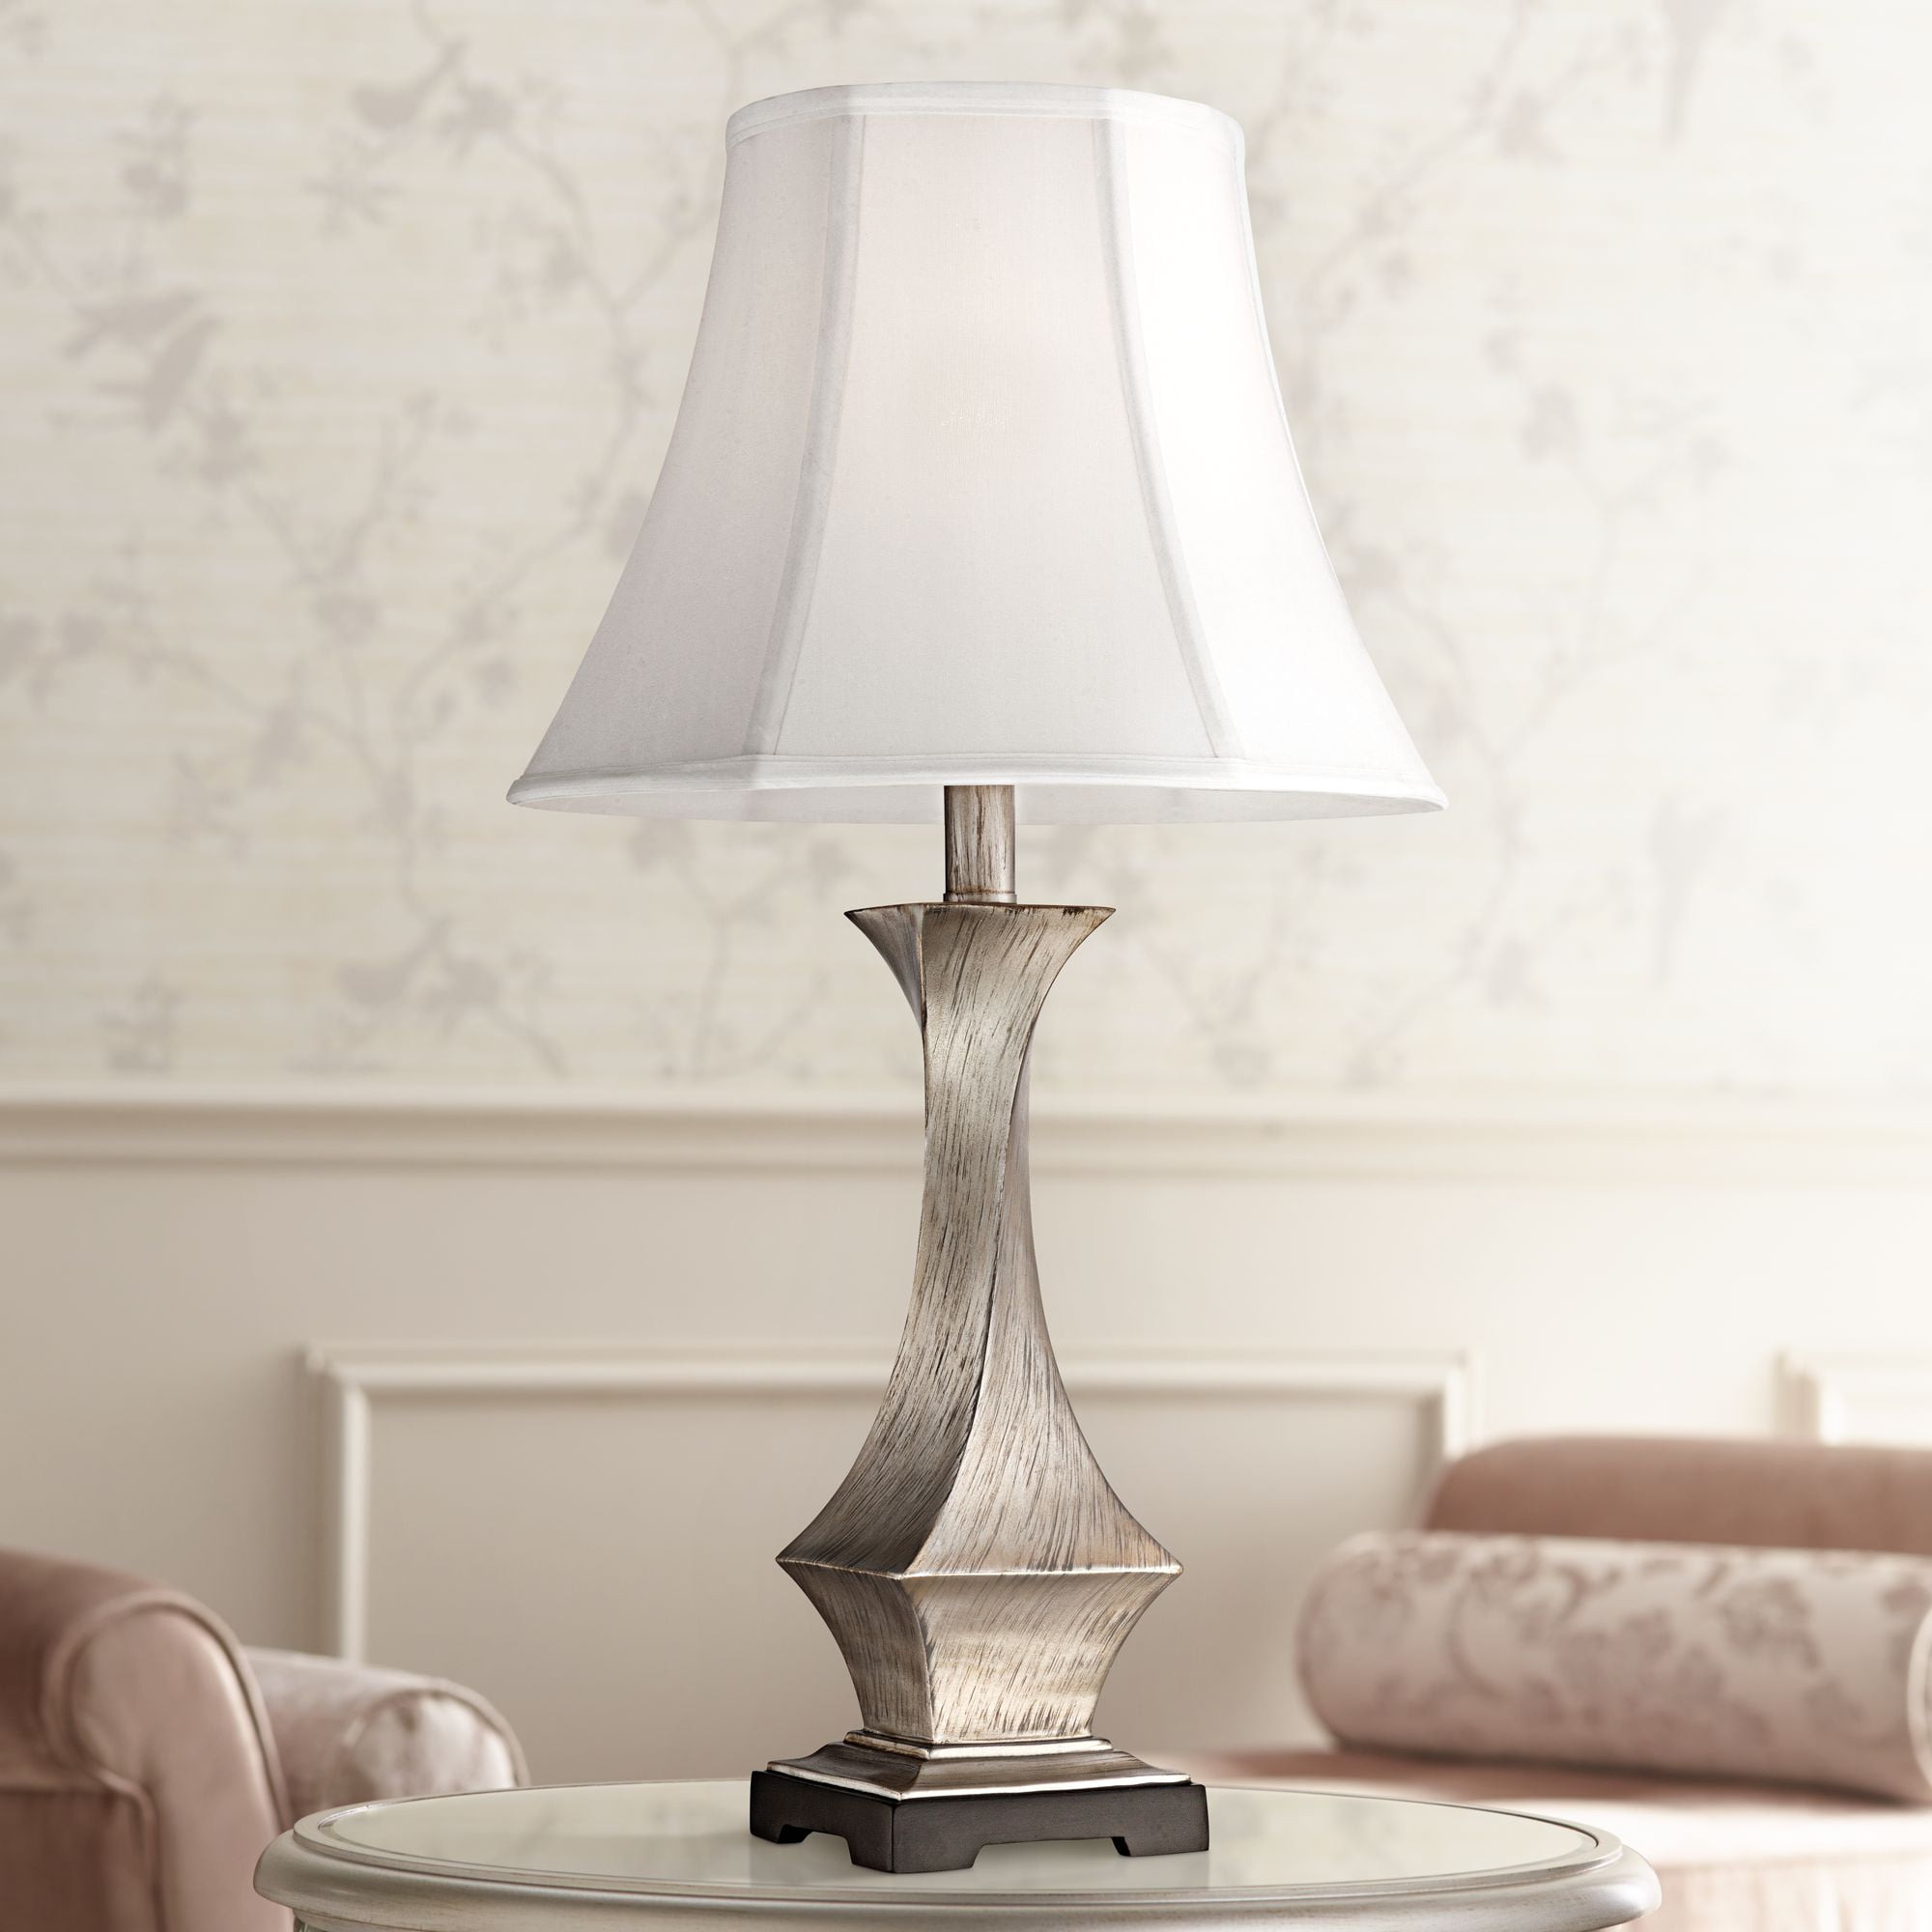 Regency Hill Modern Table Lamp Silver, Colourmatch Pair Of Touch Table Lamps Flint Grey